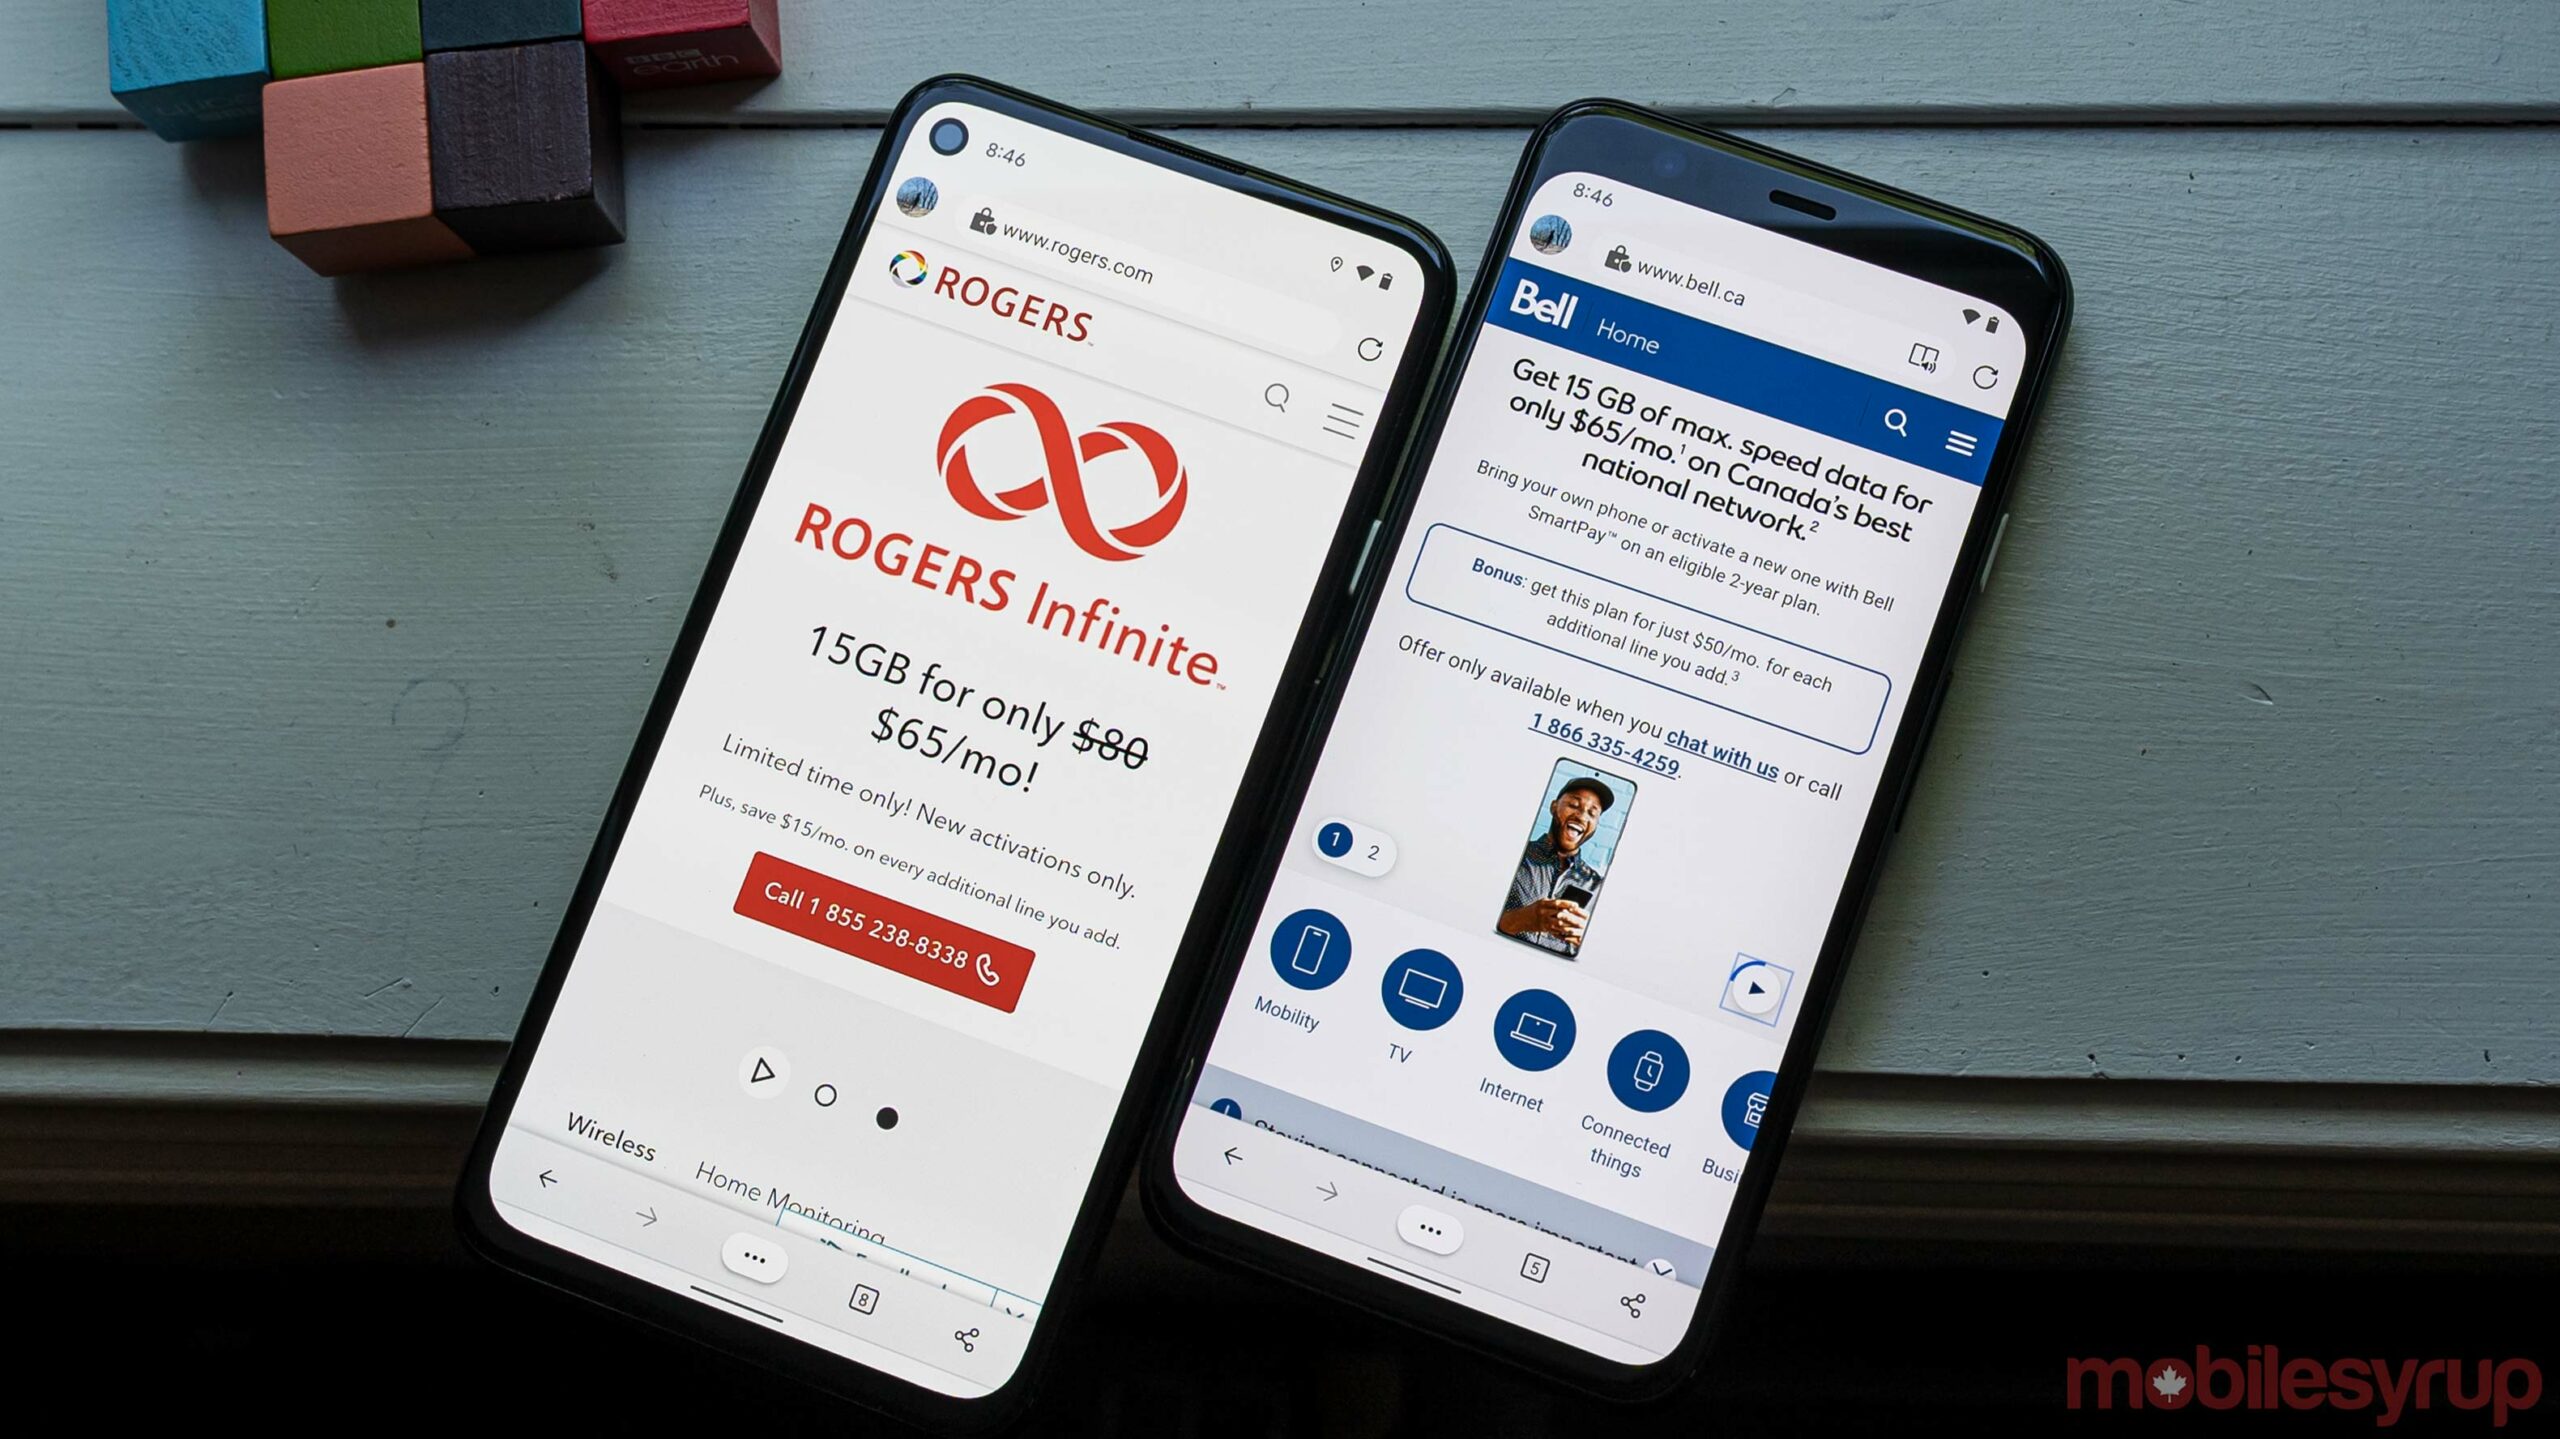 Rogers and Bell websites on smartphones